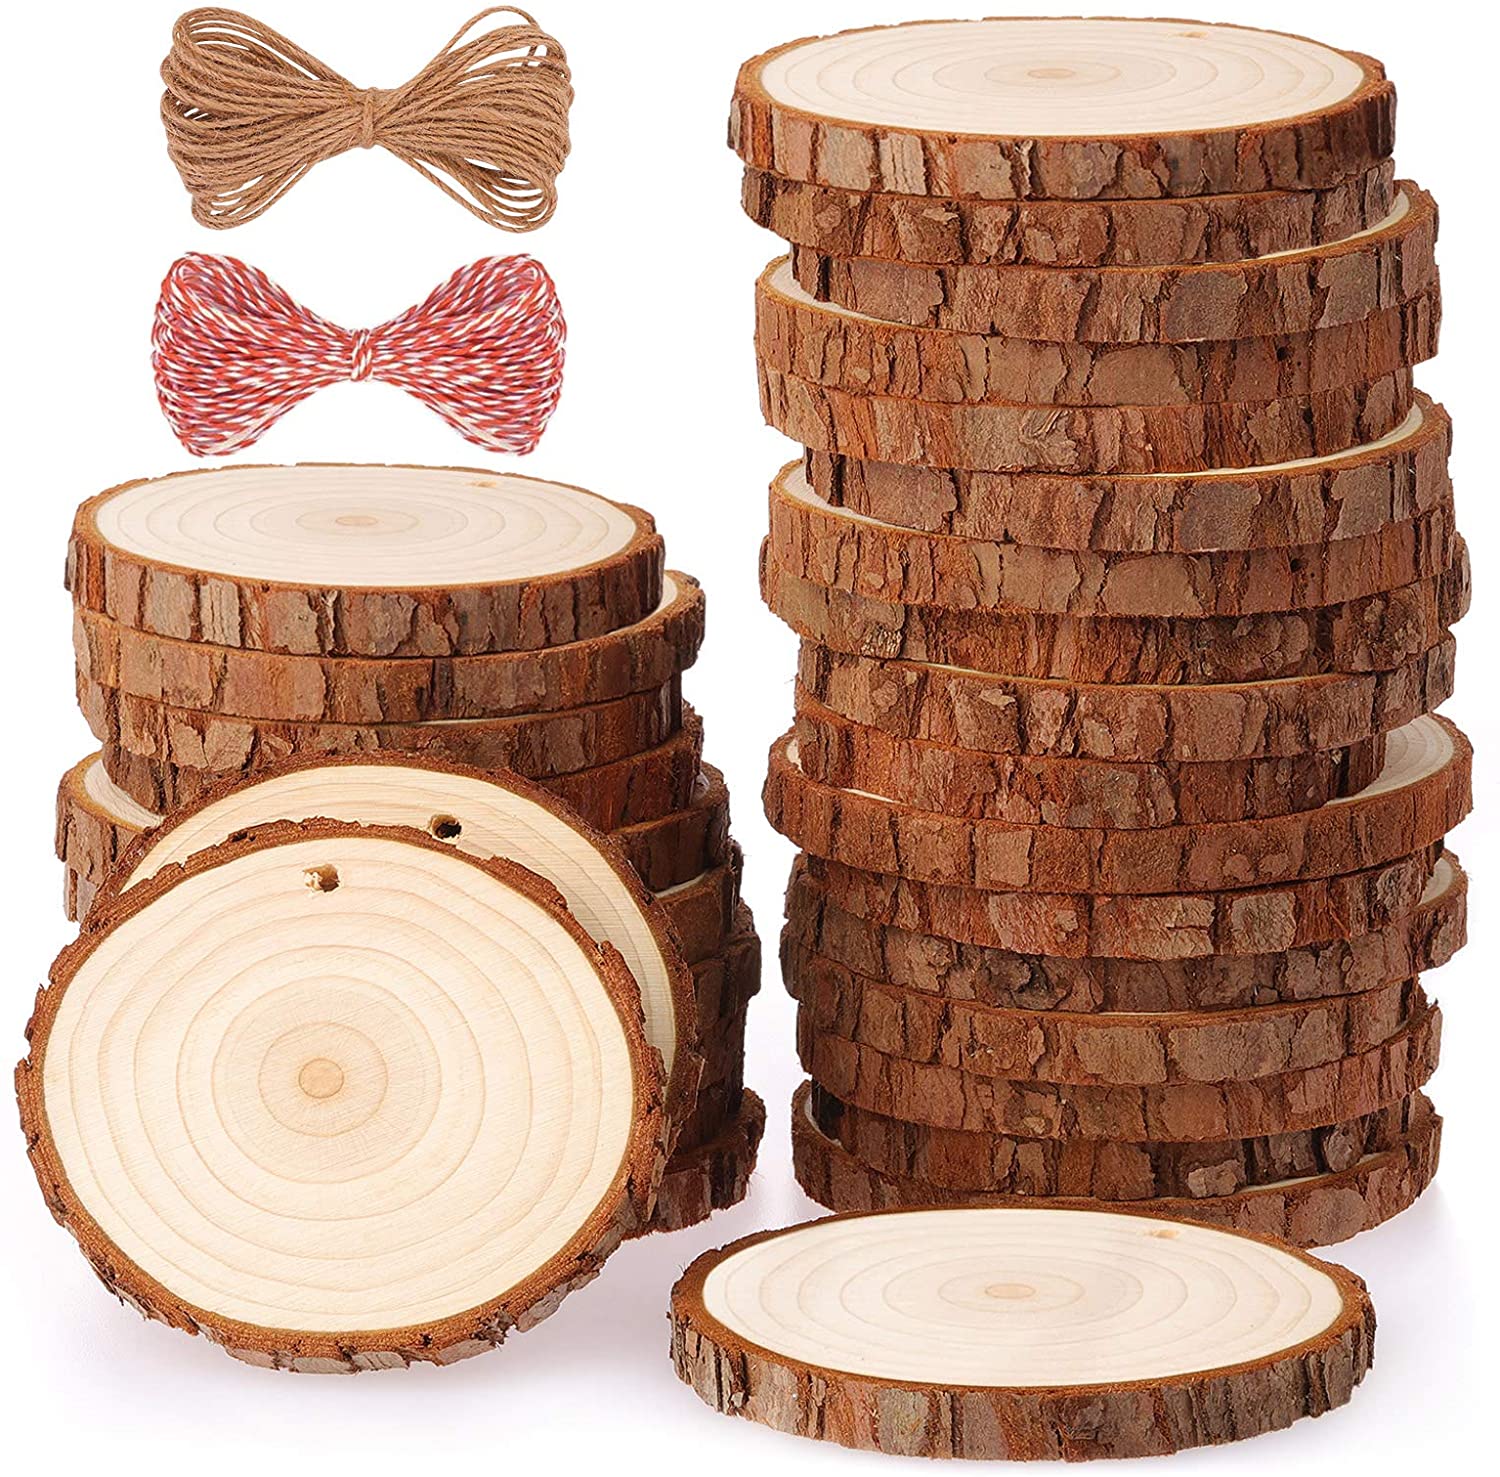 Fuyit Natural Wood Slices 30 Pcs 2.4-2.8 inches Craft Wood Kit